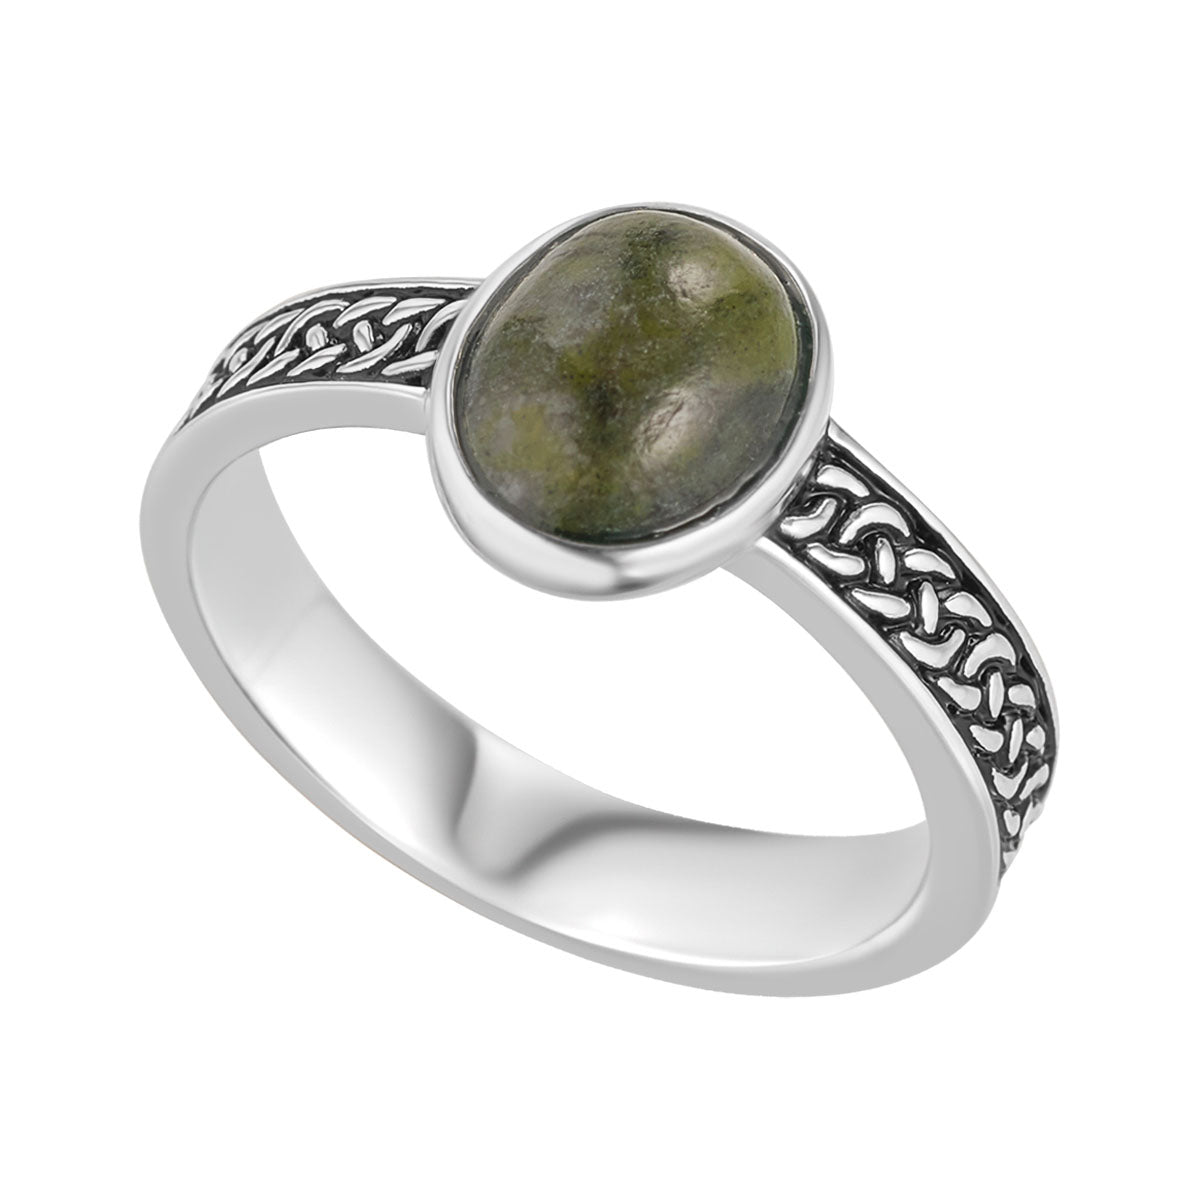 stock image of Connemara marble oxidised silver Celtic band ring s21154 from Solvar jewellery